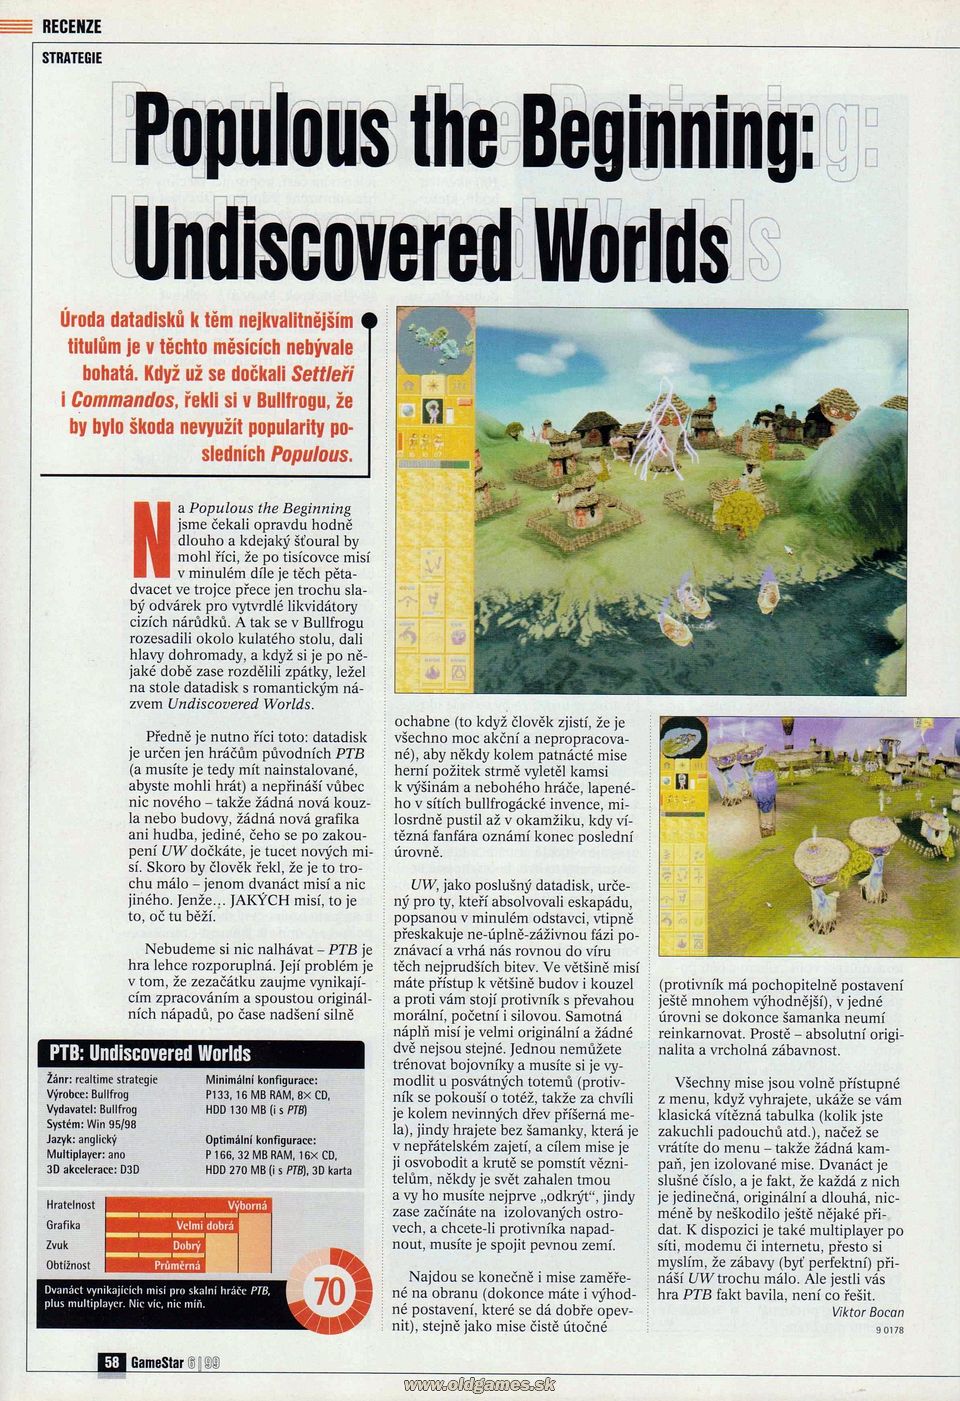 Populous the Beginning: Undiscovered Worlds